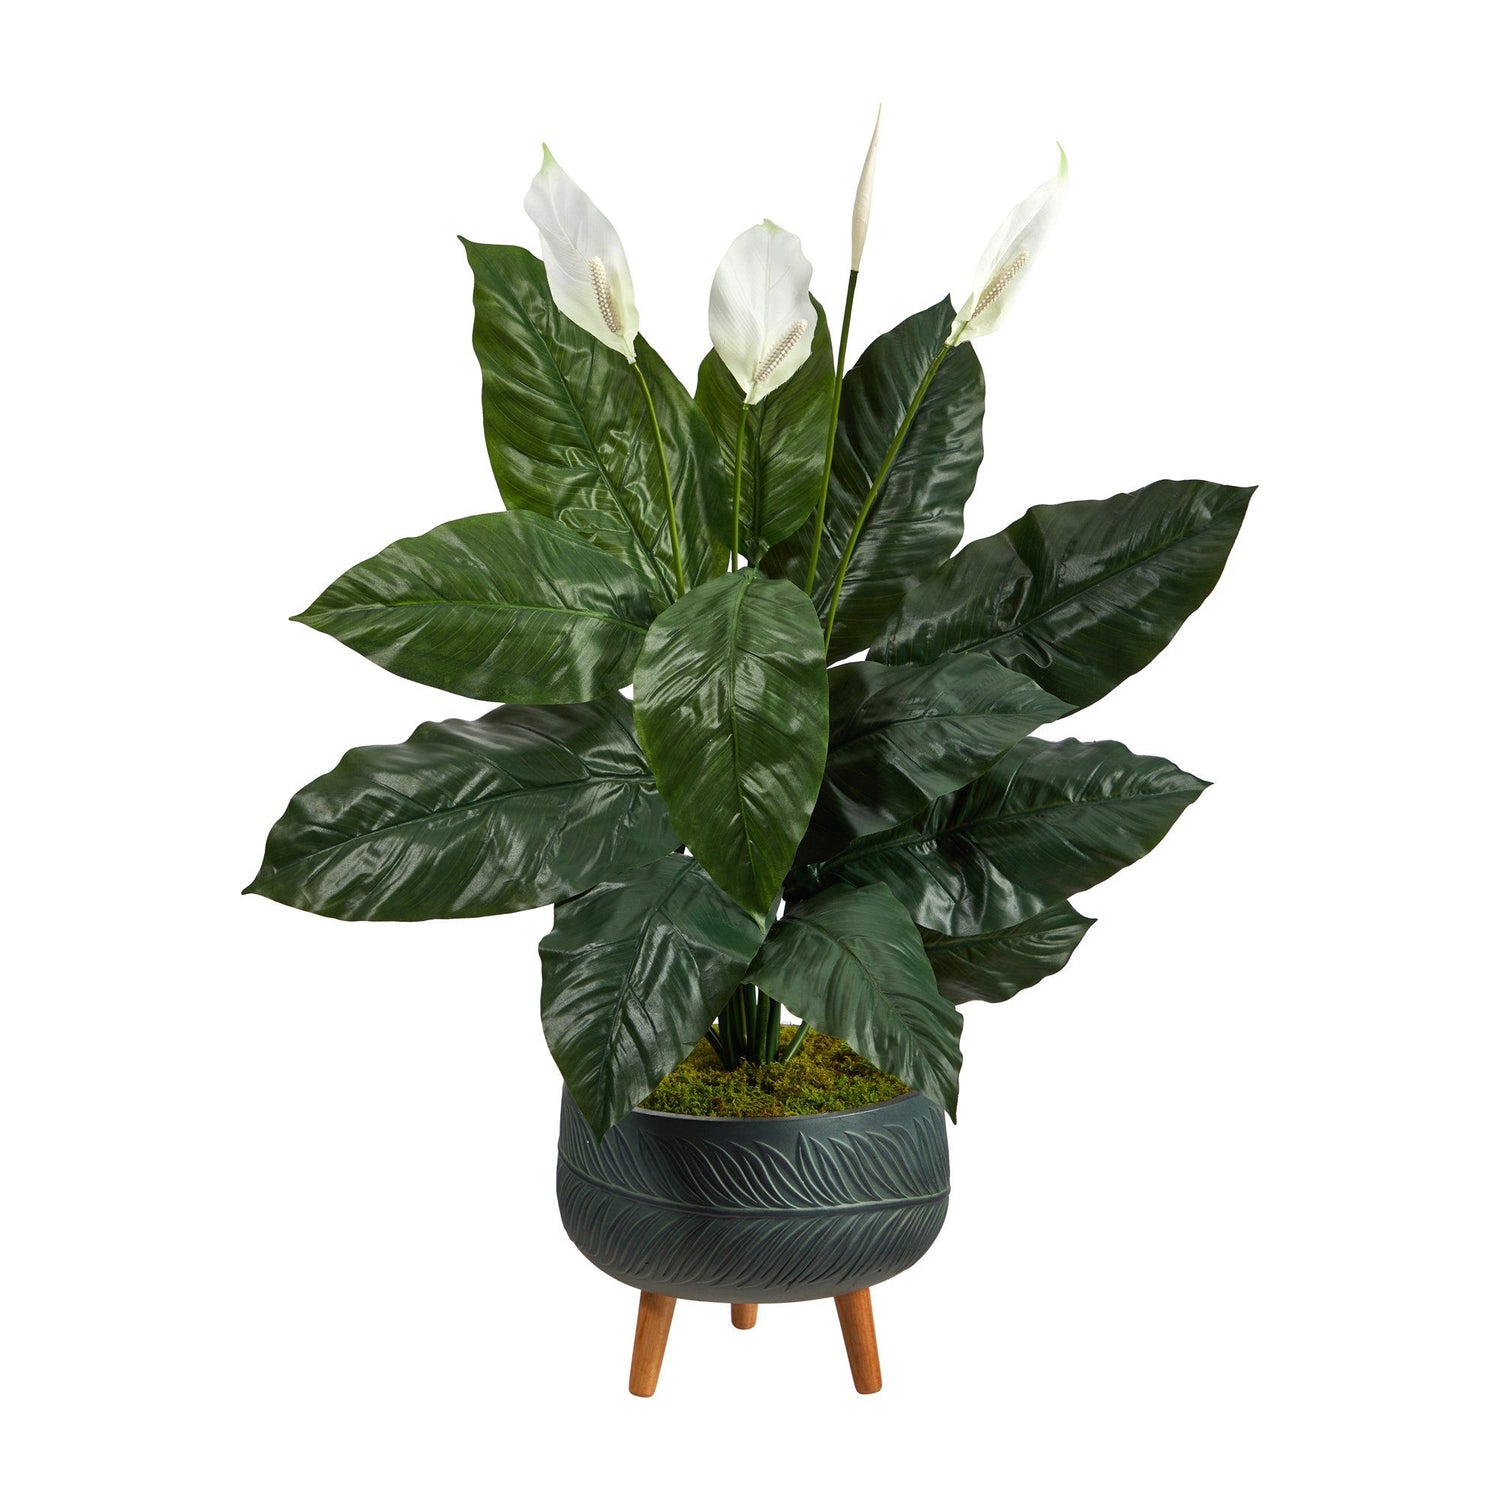 4’ Spathiphyllum Artificial Plant in Black Planter with Stand